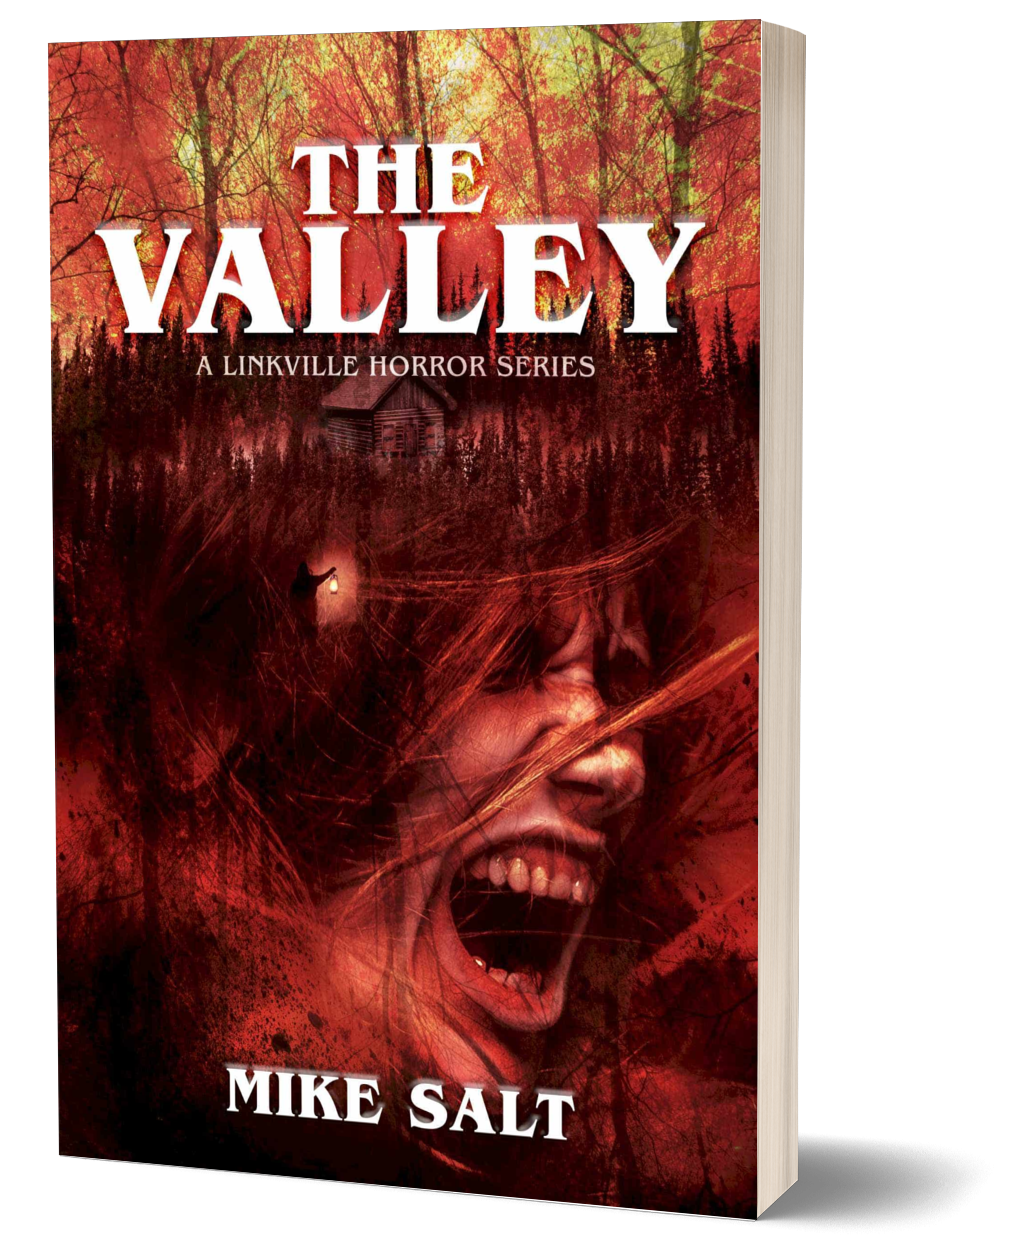 The Valley: A Linkville Horror Series